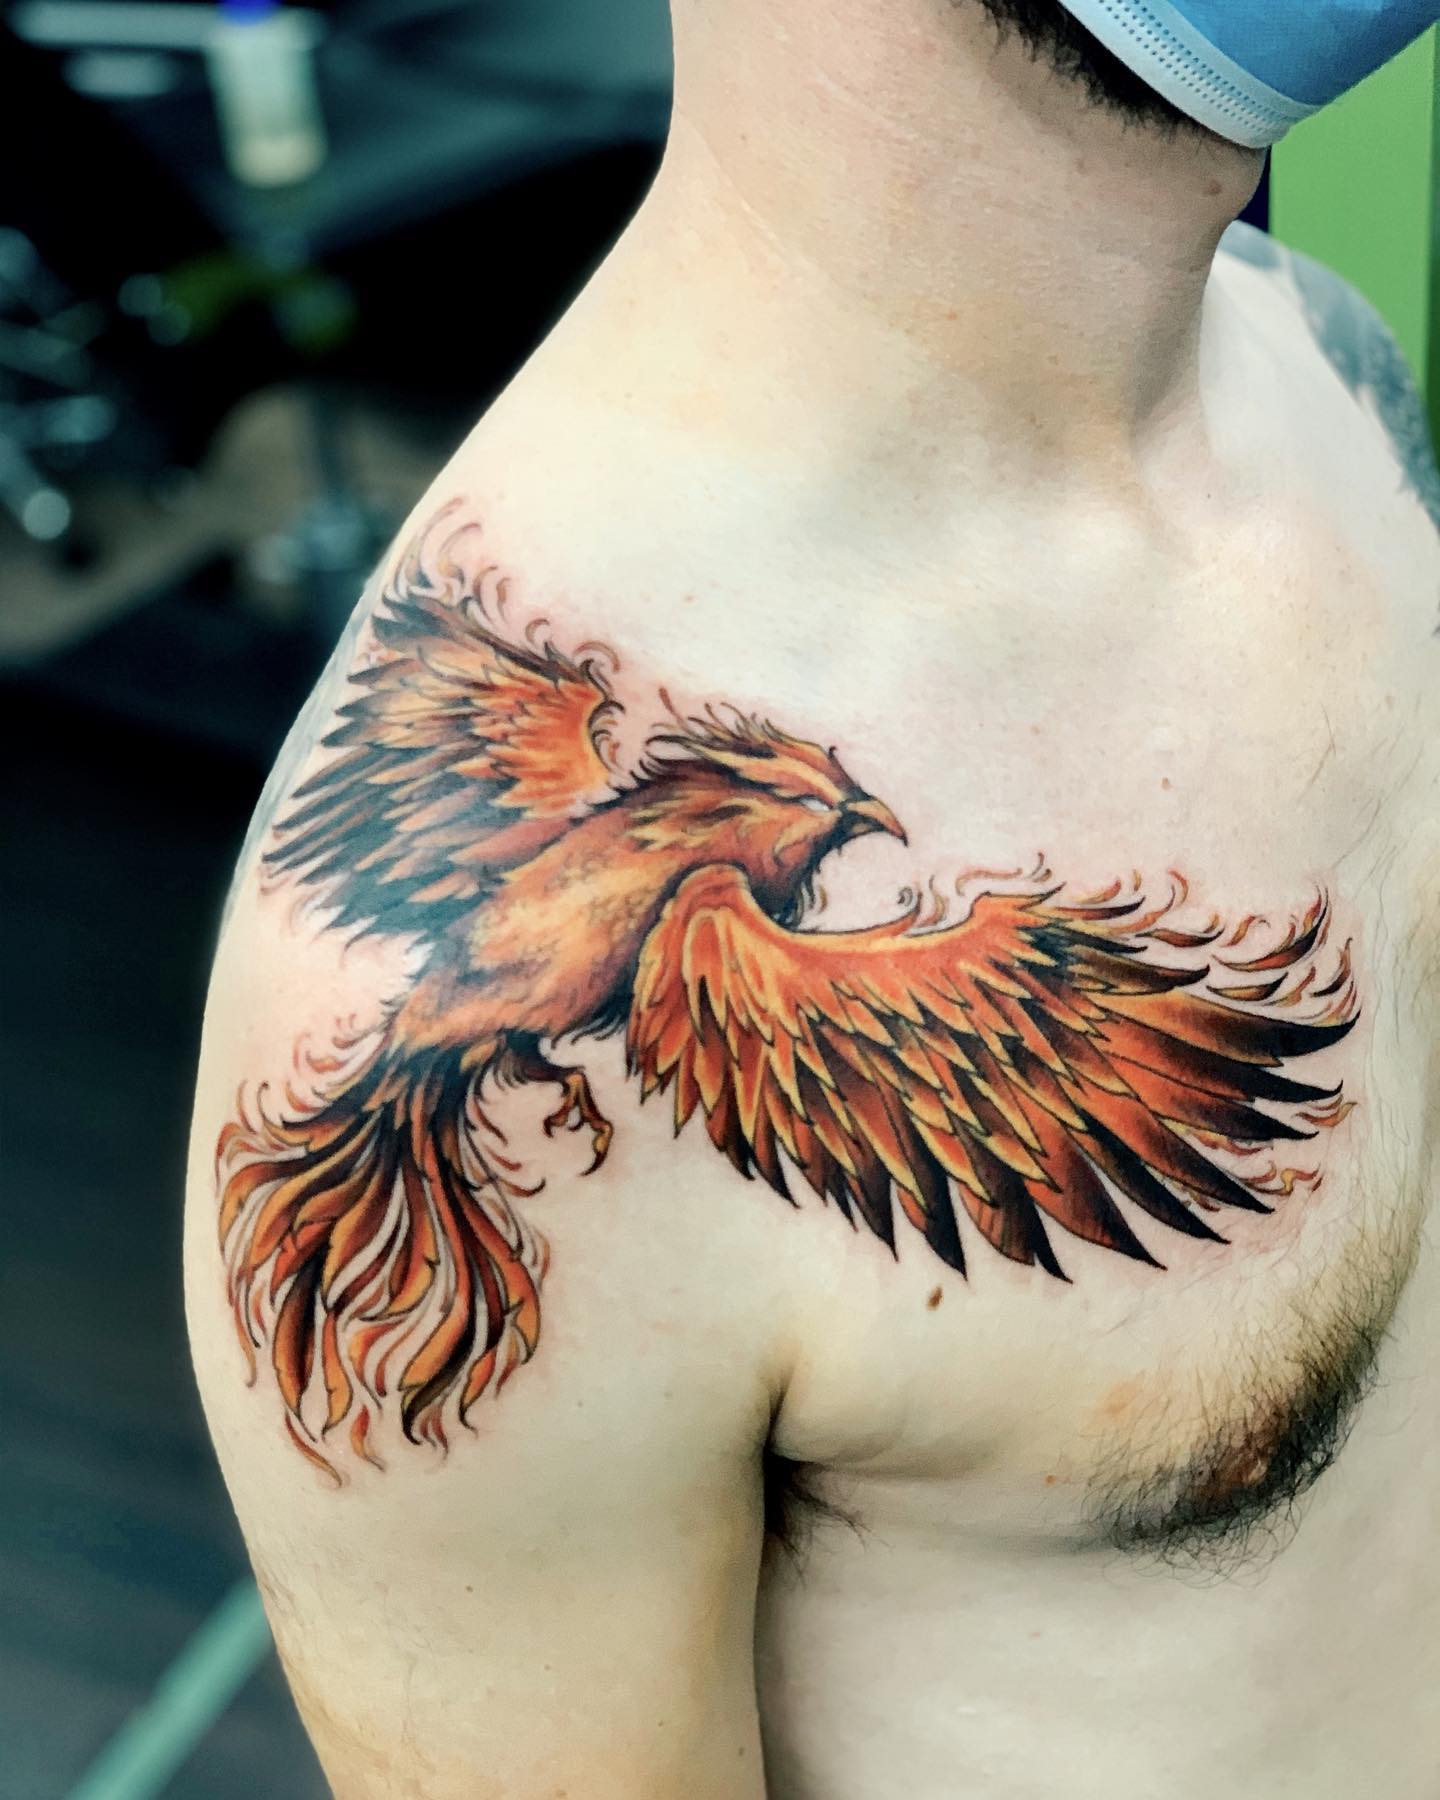 Bird tattoos usually symbolize the path that you must take in order to push through. Show that you’re bright and bold yet that you have a clear vision with this fiery idea.